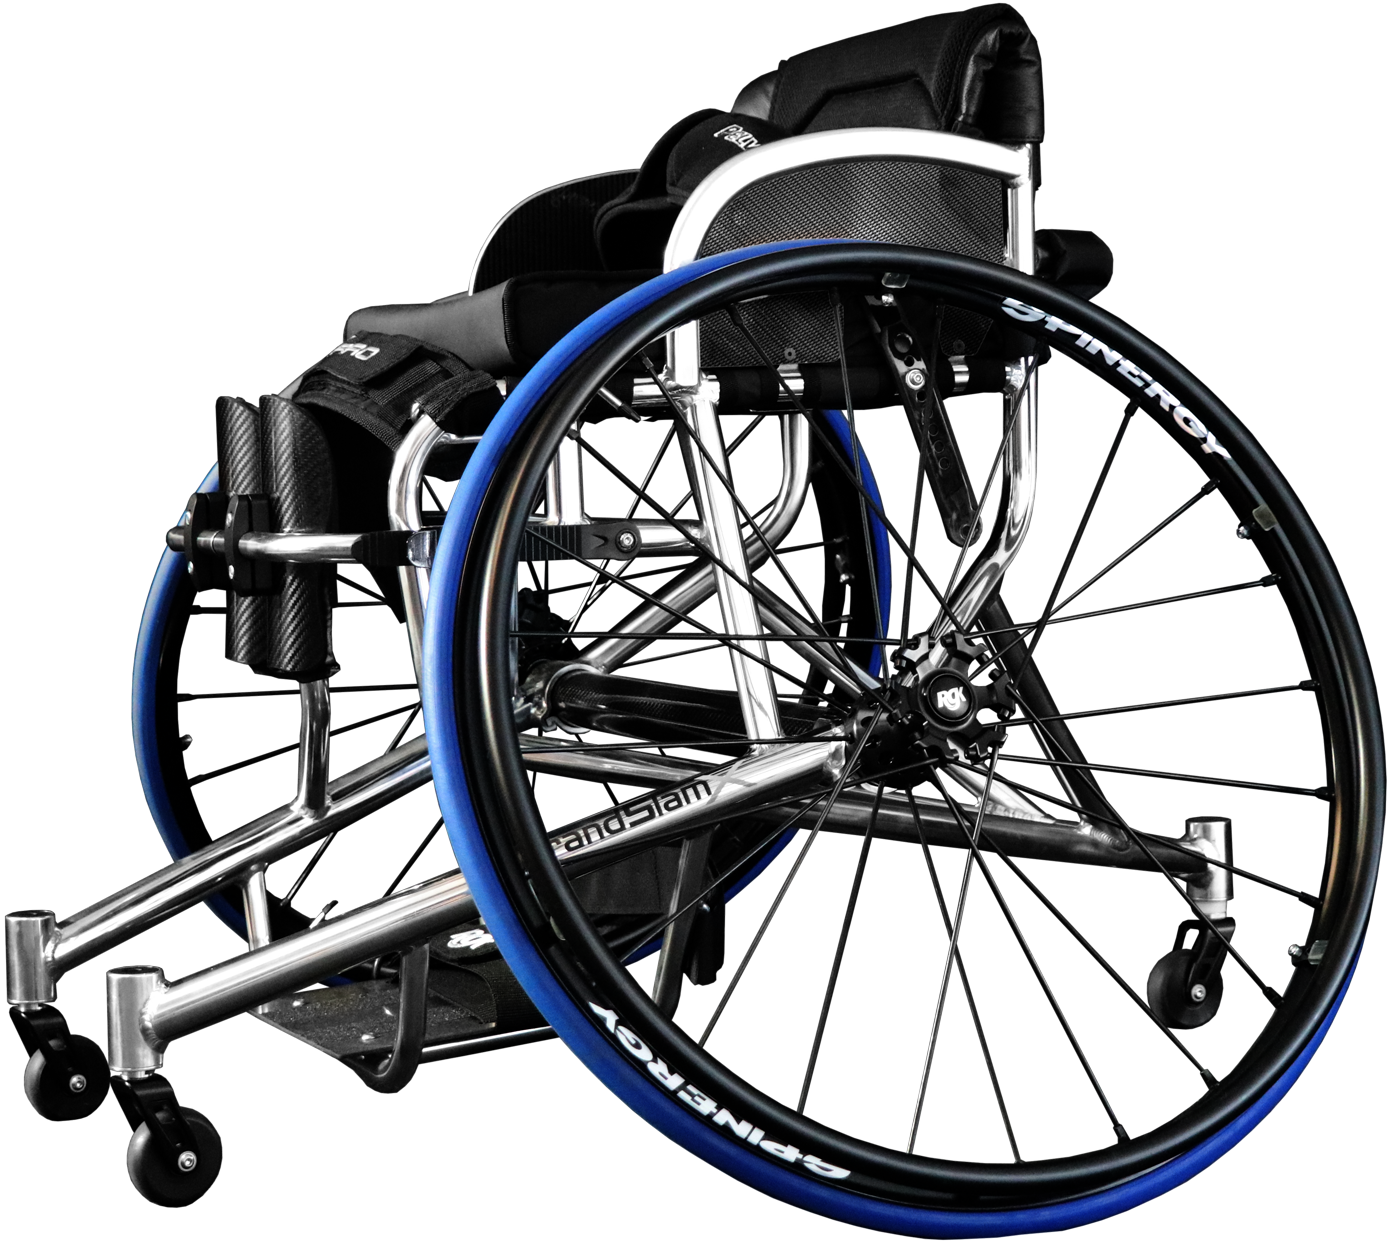 RGK tennis wheelchair in blue and silver